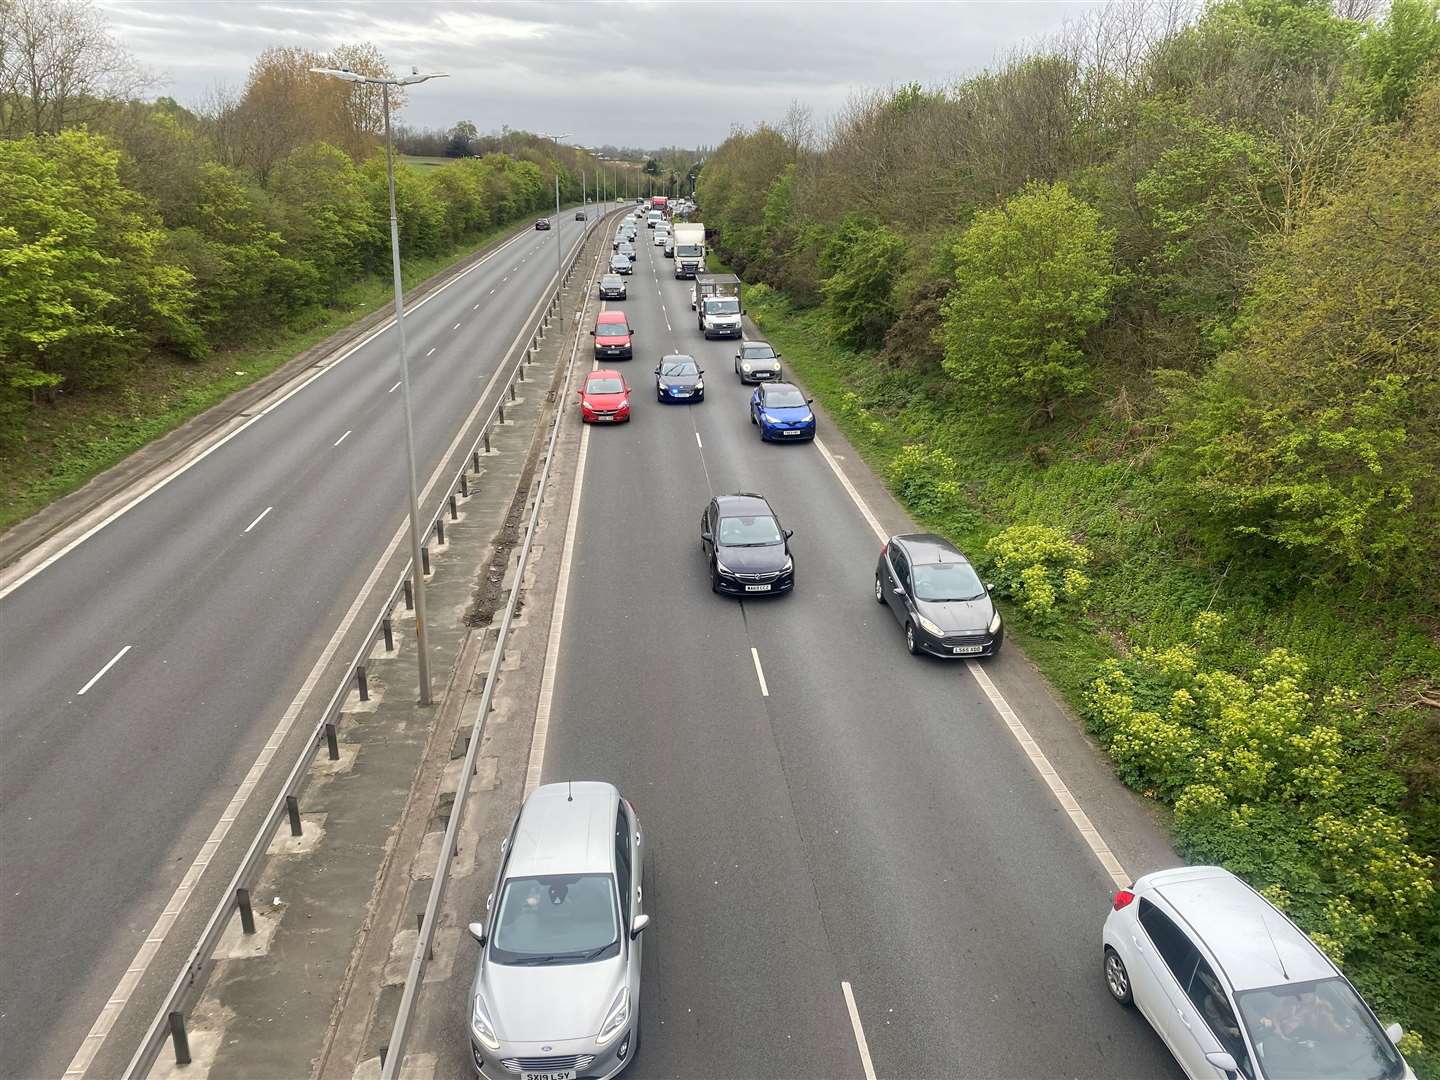 Traffic builds on the A299 Thanet Way as motorists approach the contraflow near Dargate